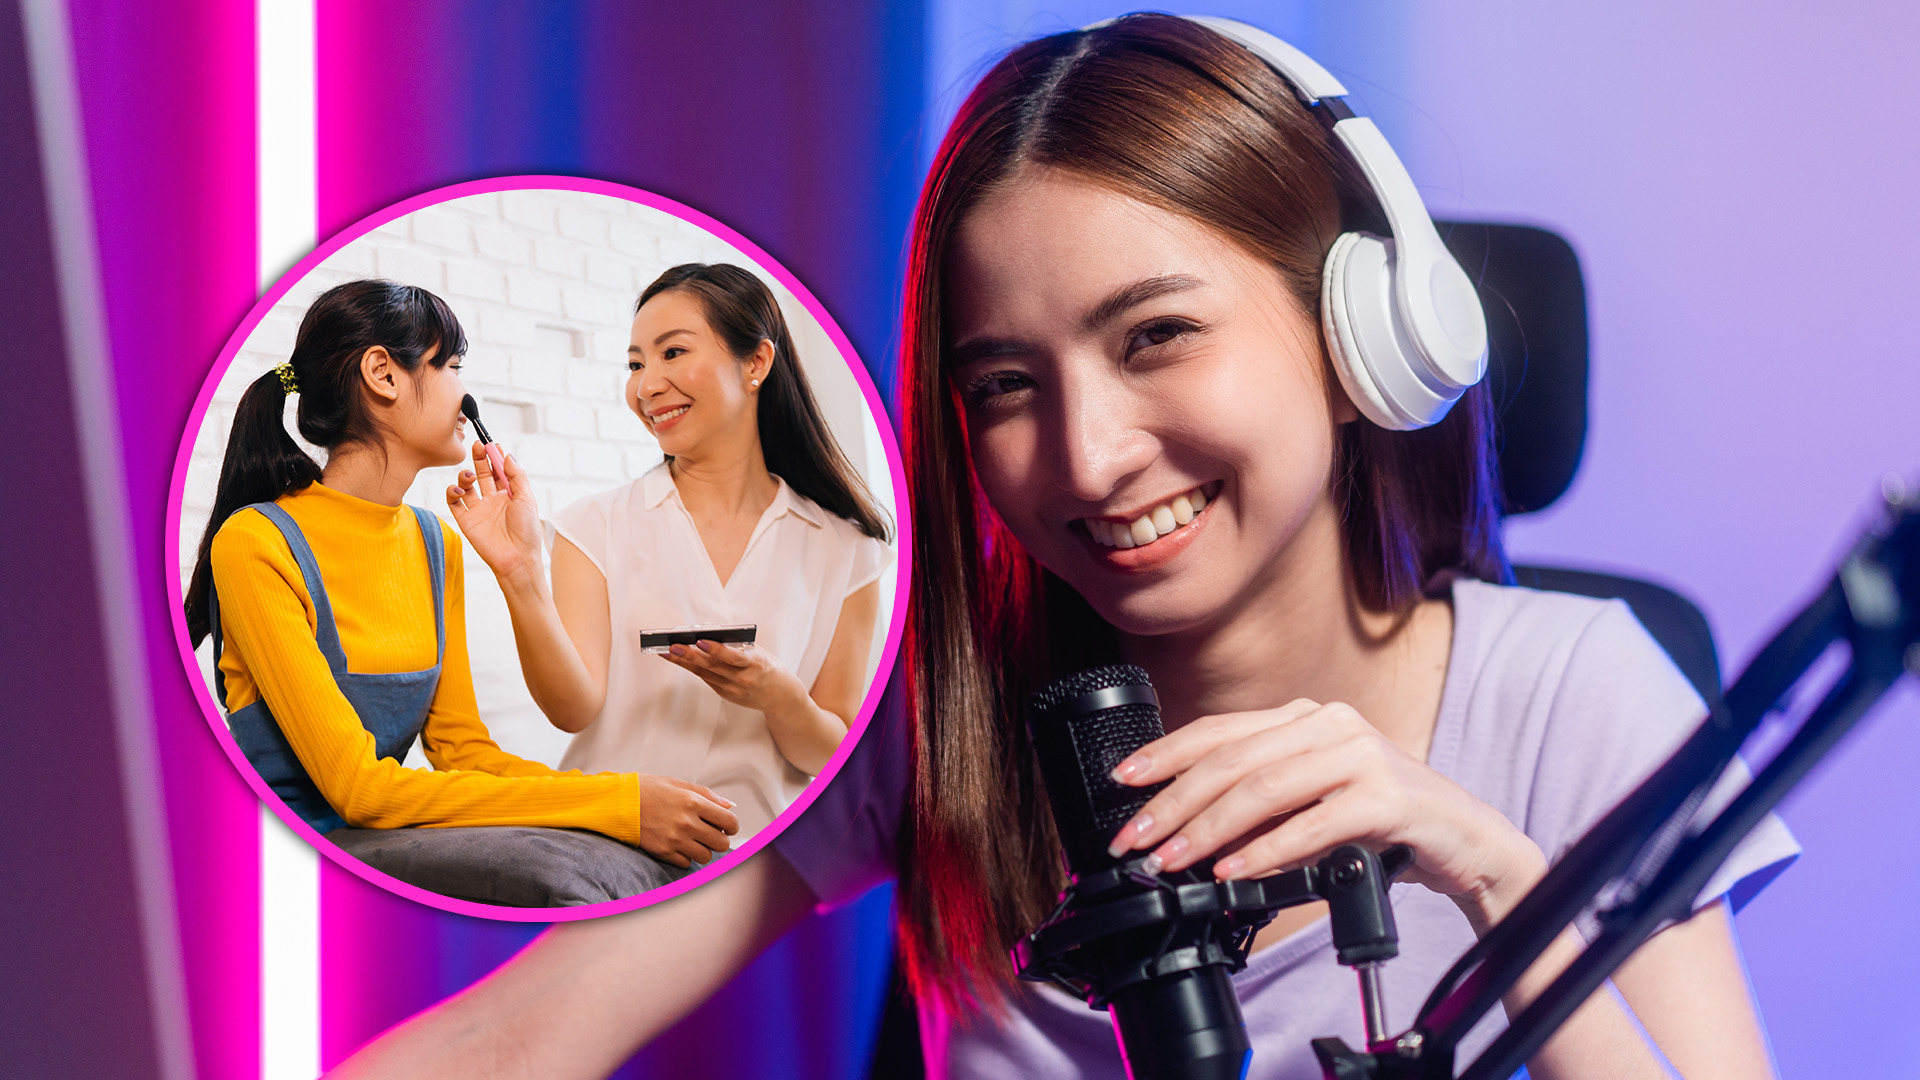 A mother in China has sued an agent she paid US$180,000 to turn her daughter into an online star after his efforts failed. Photo: SCMP composite/Shutterstock